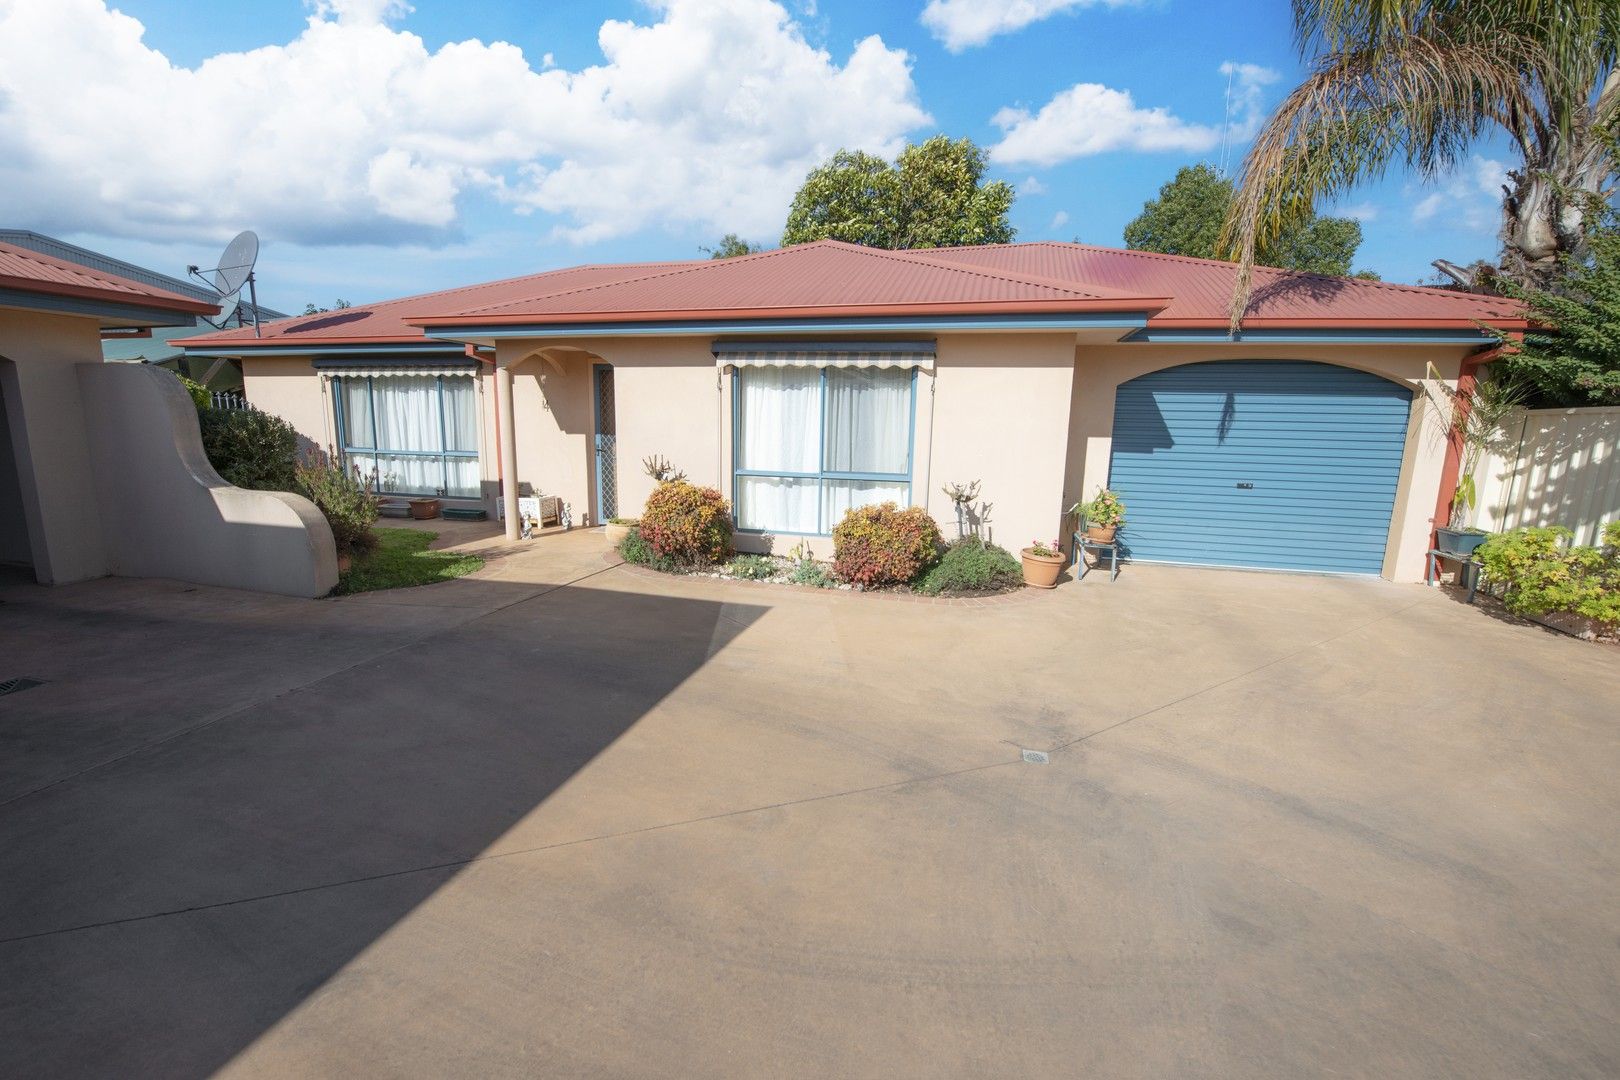 2 bedrooms House in 4/11 Wonnon Court SWAN HILL VIC, 3585